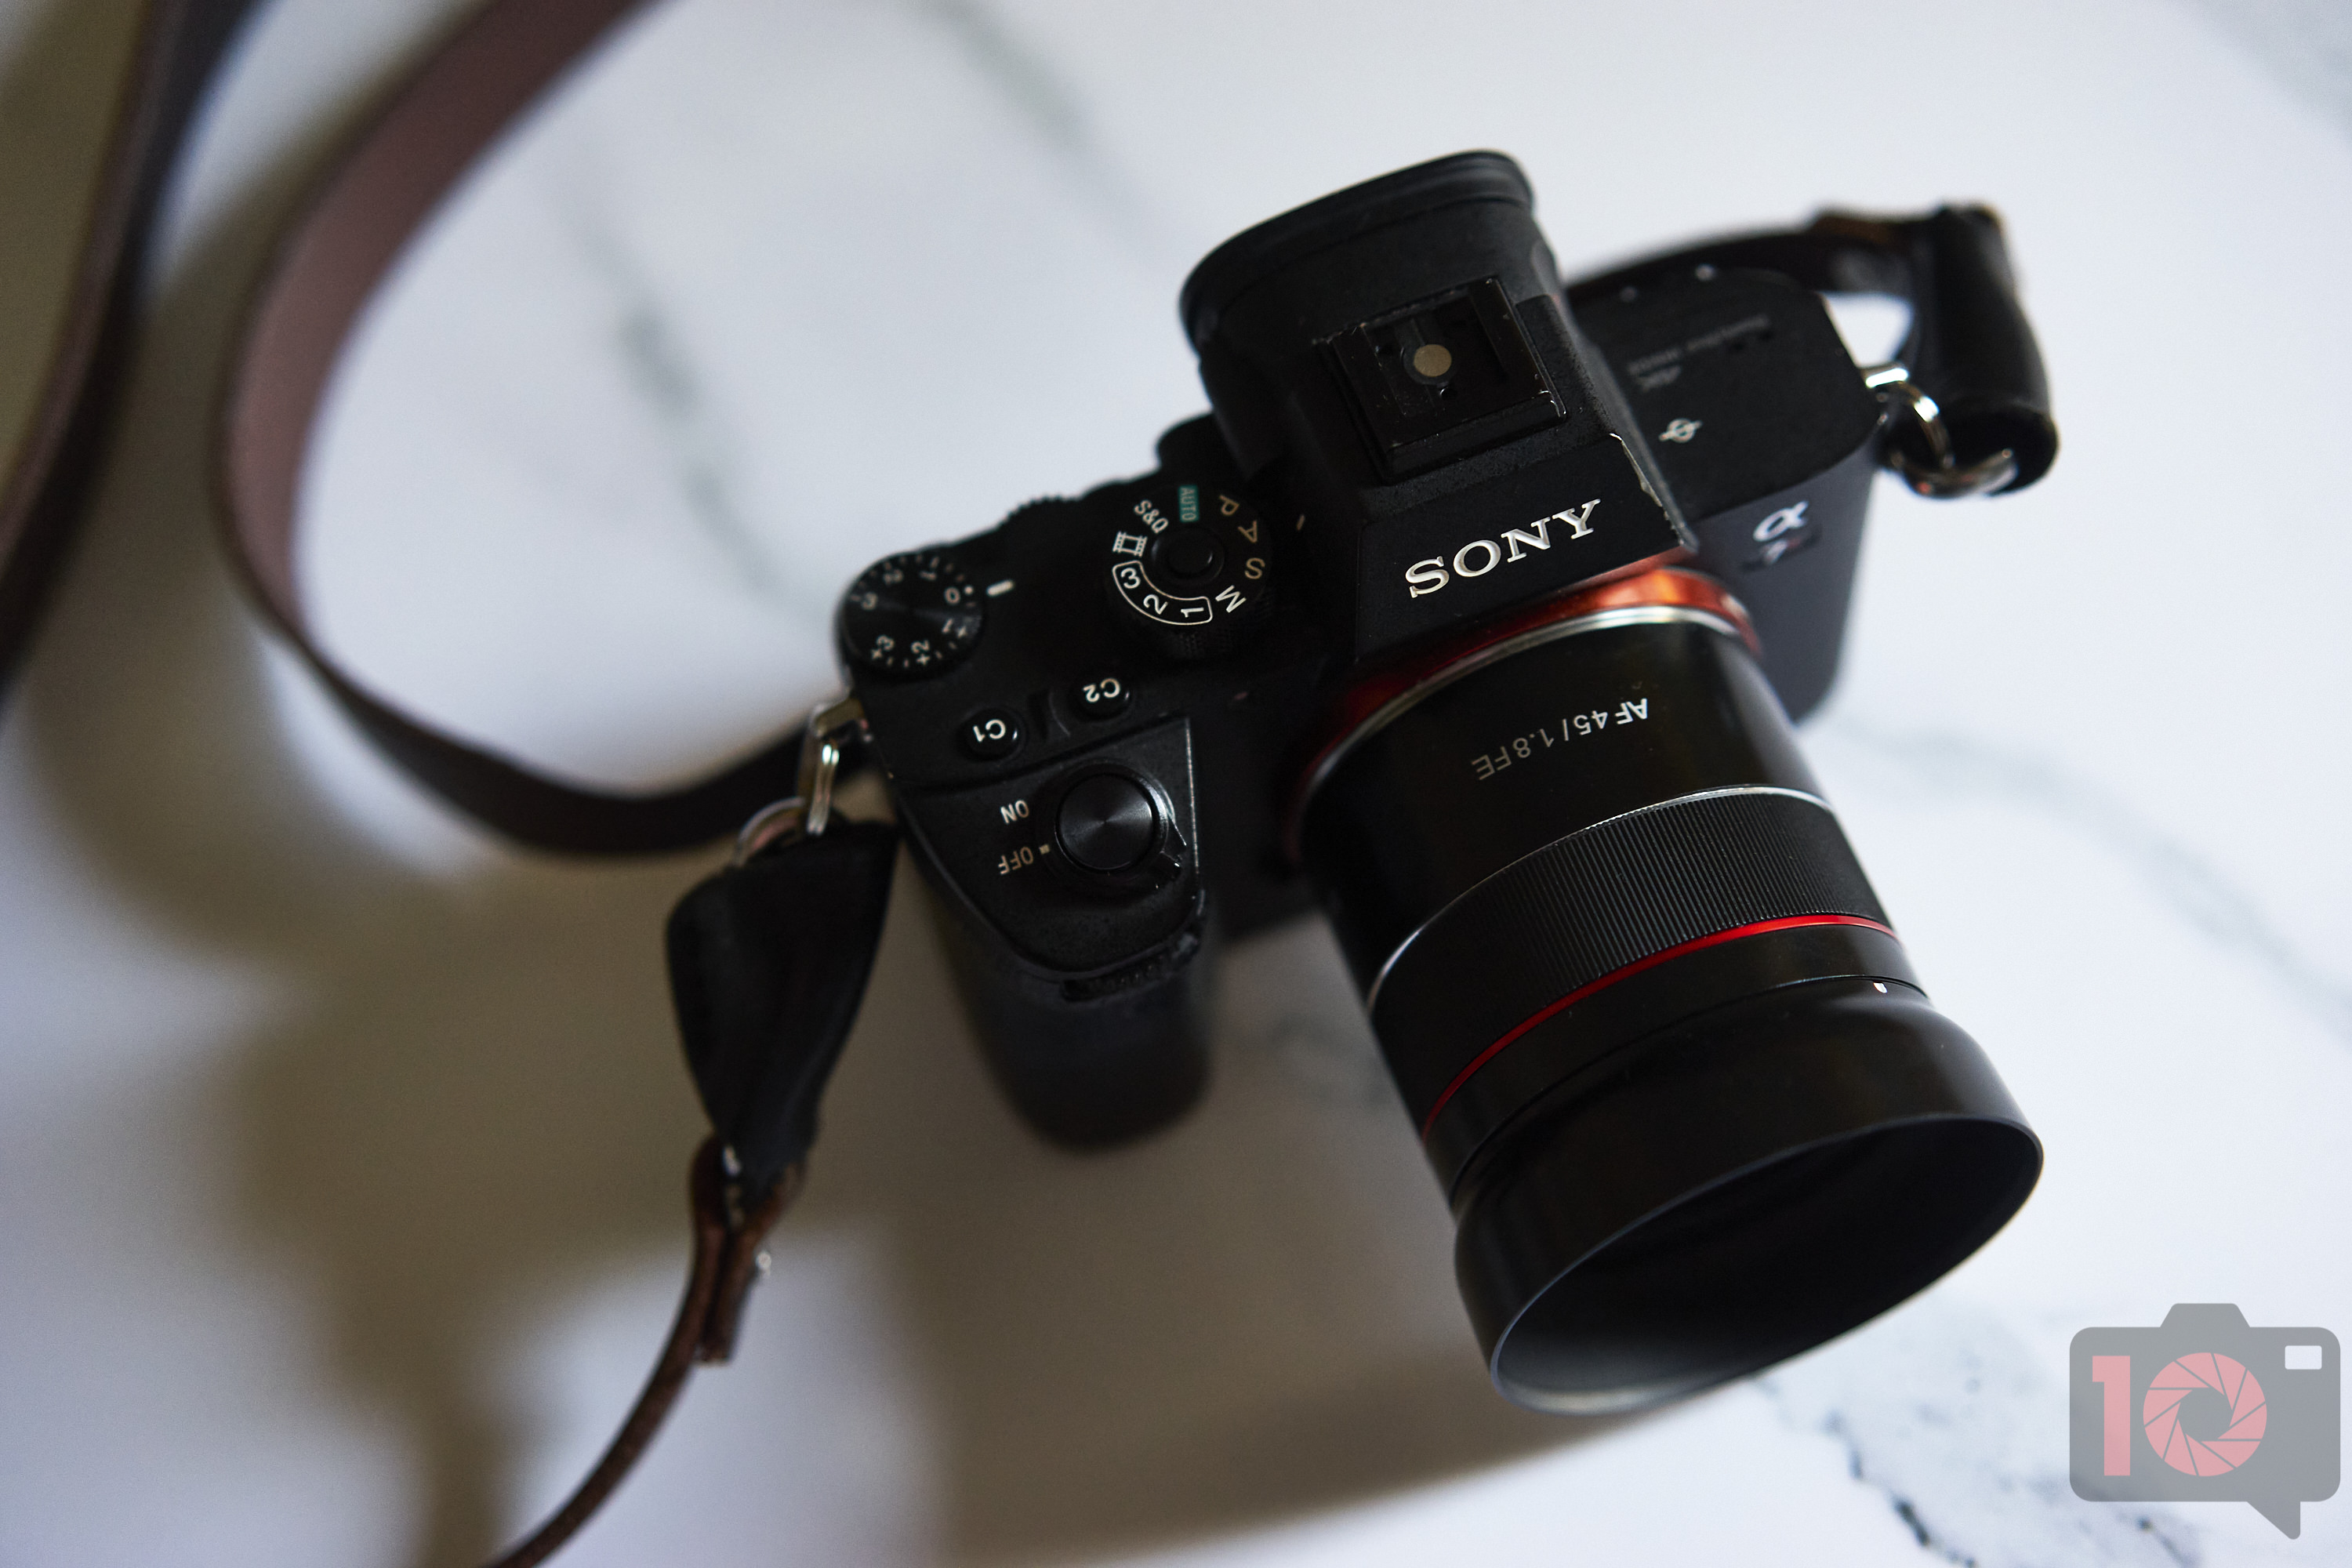 Chris Gampat The Phoblographer Samyang 45mm f1.8 Review product photos 2.21-160s1600 1